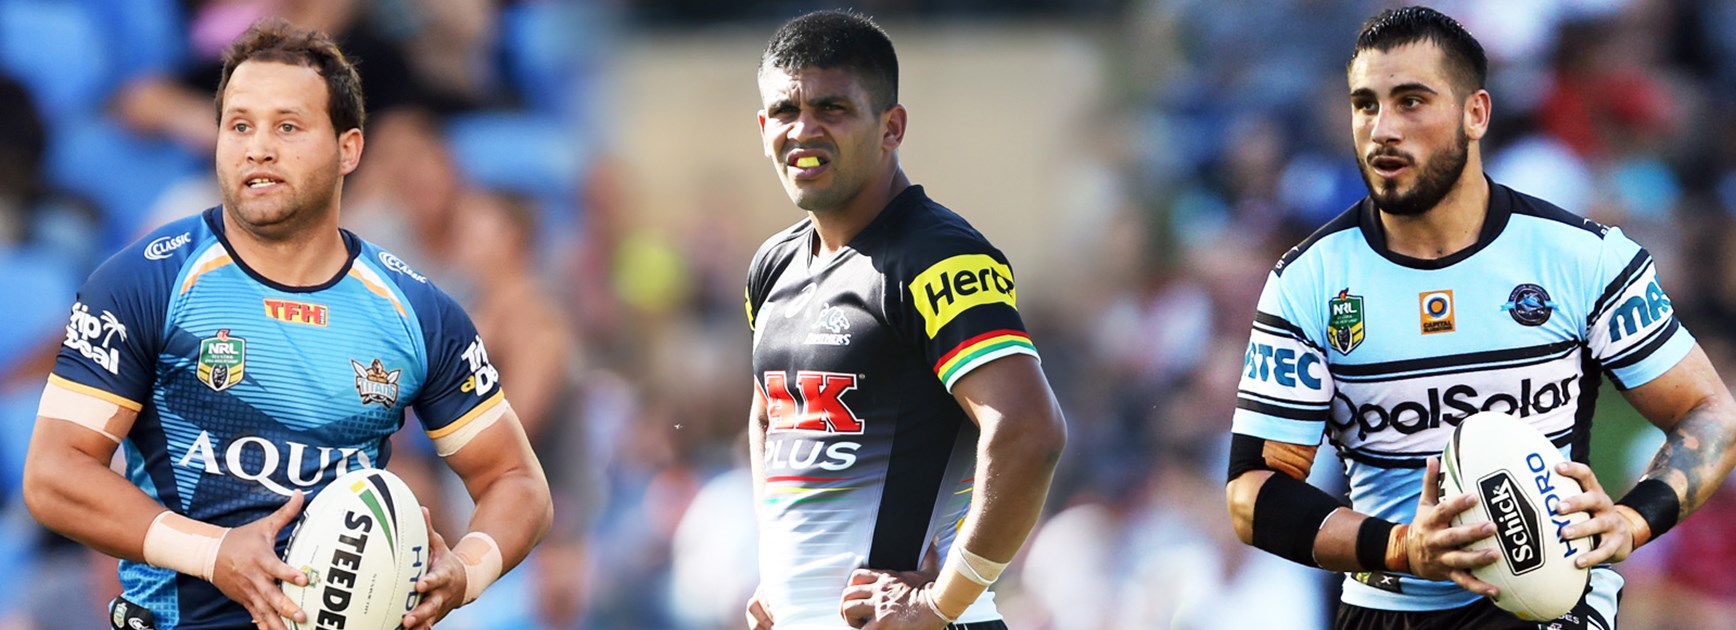 Utility men: NRL's most underrated players?